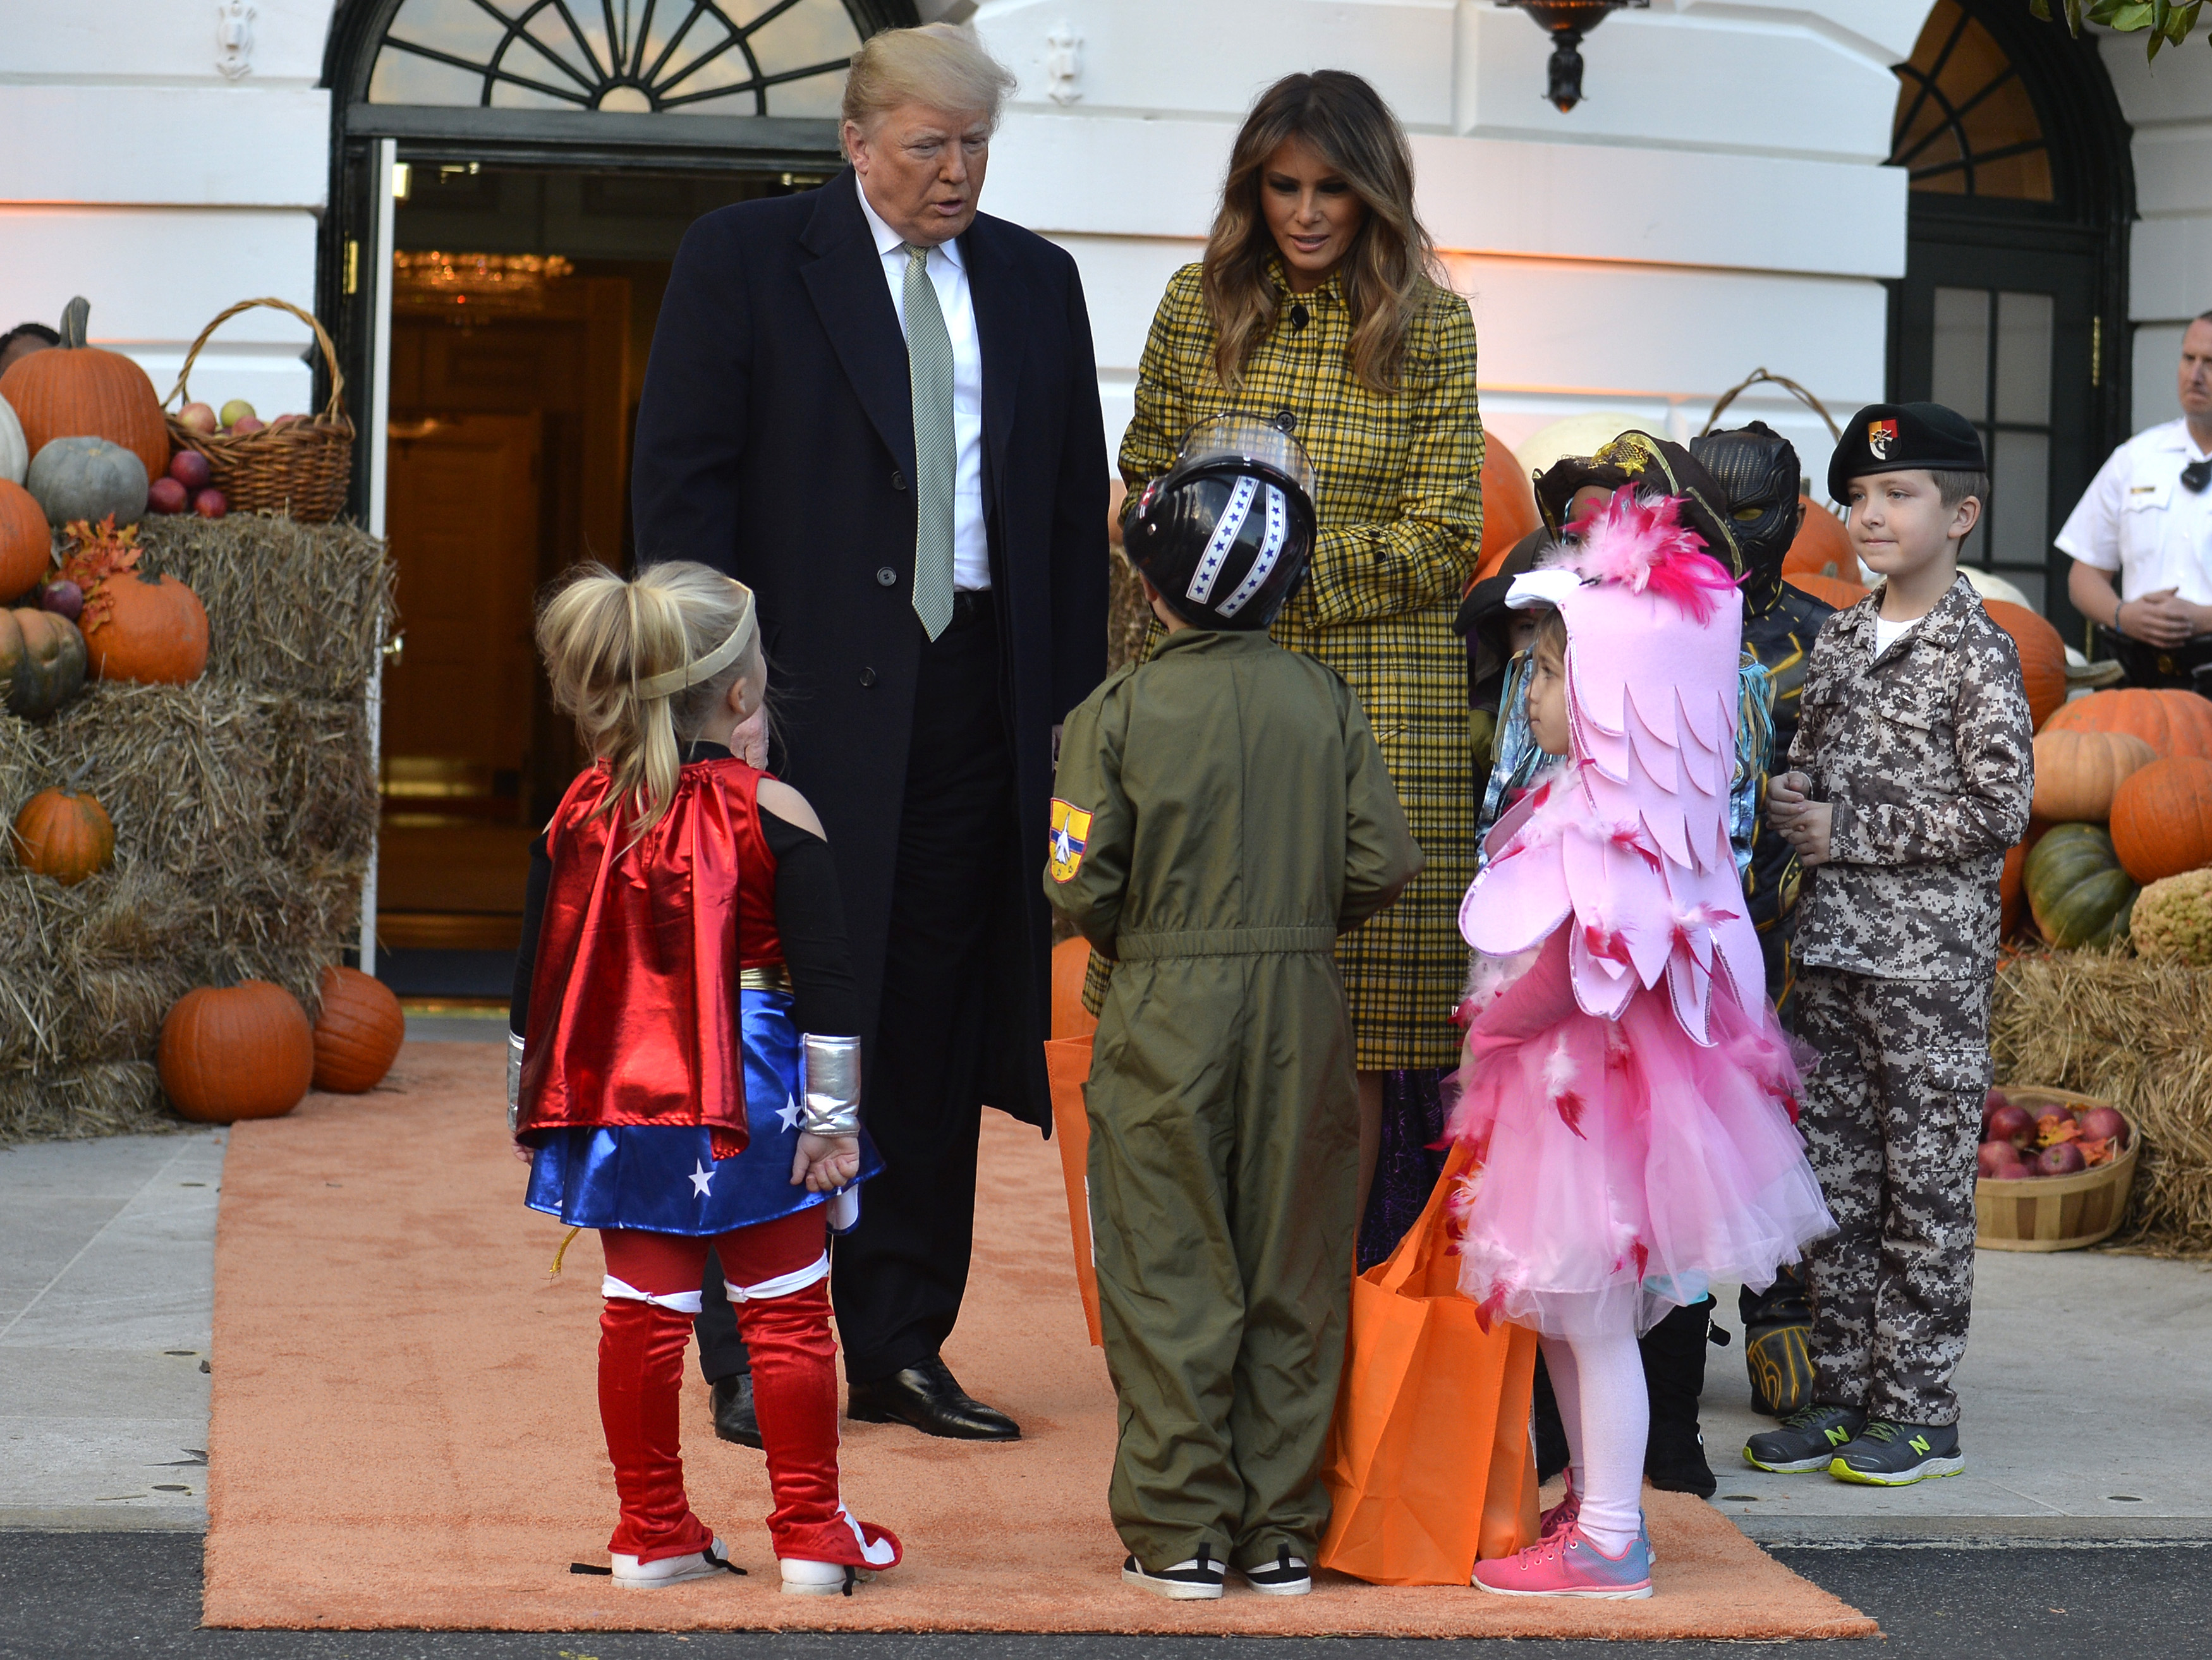 President Donald Trump and First Lady Melania Trump welcome trick-or-treaters to the White House for Halloween festivities, October 28, 2018, in Washington, DC. (Pool&mdash;Getty Images)